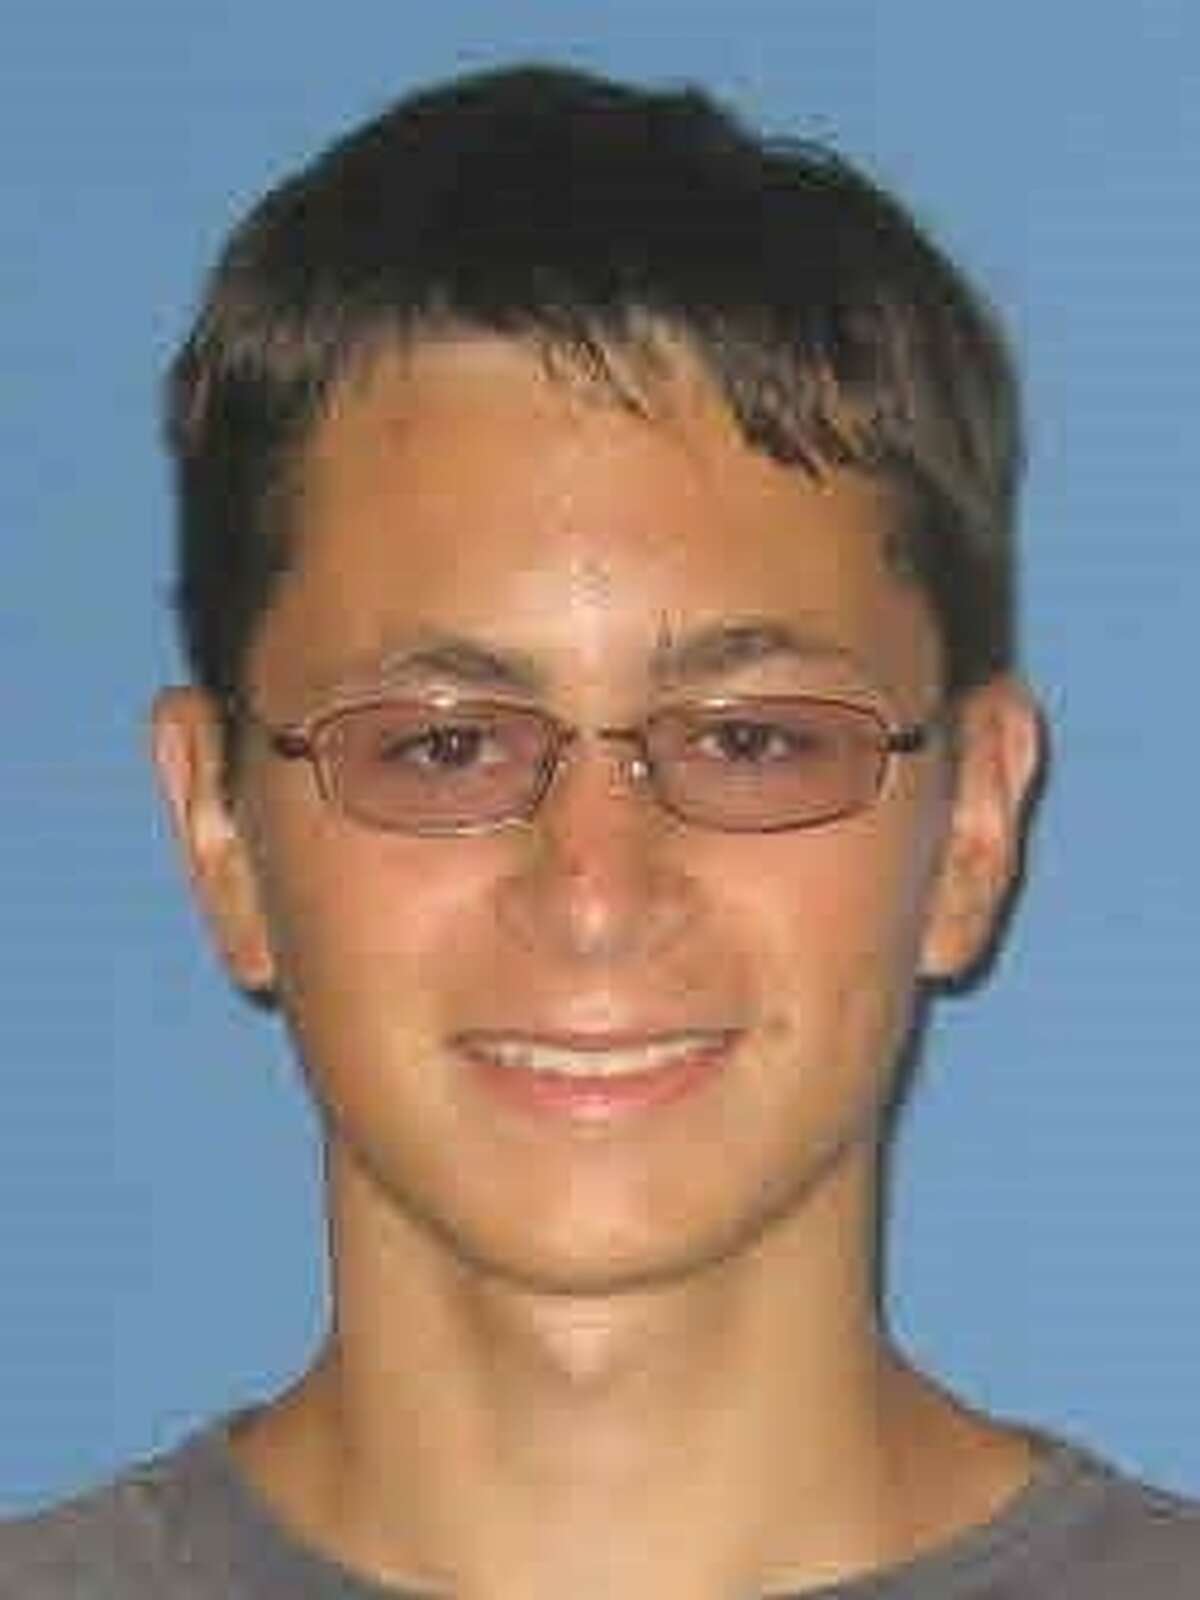 Click ahead to view 5 things to know about Mark Conditt, the suspected Austin bomber. 1. Law enforcement officials said Wednesday morning, March 21, 2018, that Mark Anthony Conditt is the suspected bomber behind a string of packages dropped off or mailed to multiple areas across the Austin-area, that exploded, killing two and injuring more since March 2, 2018. He is seen here in a photo taken while at Austin Community College, where he attended from 2010 to 2012.